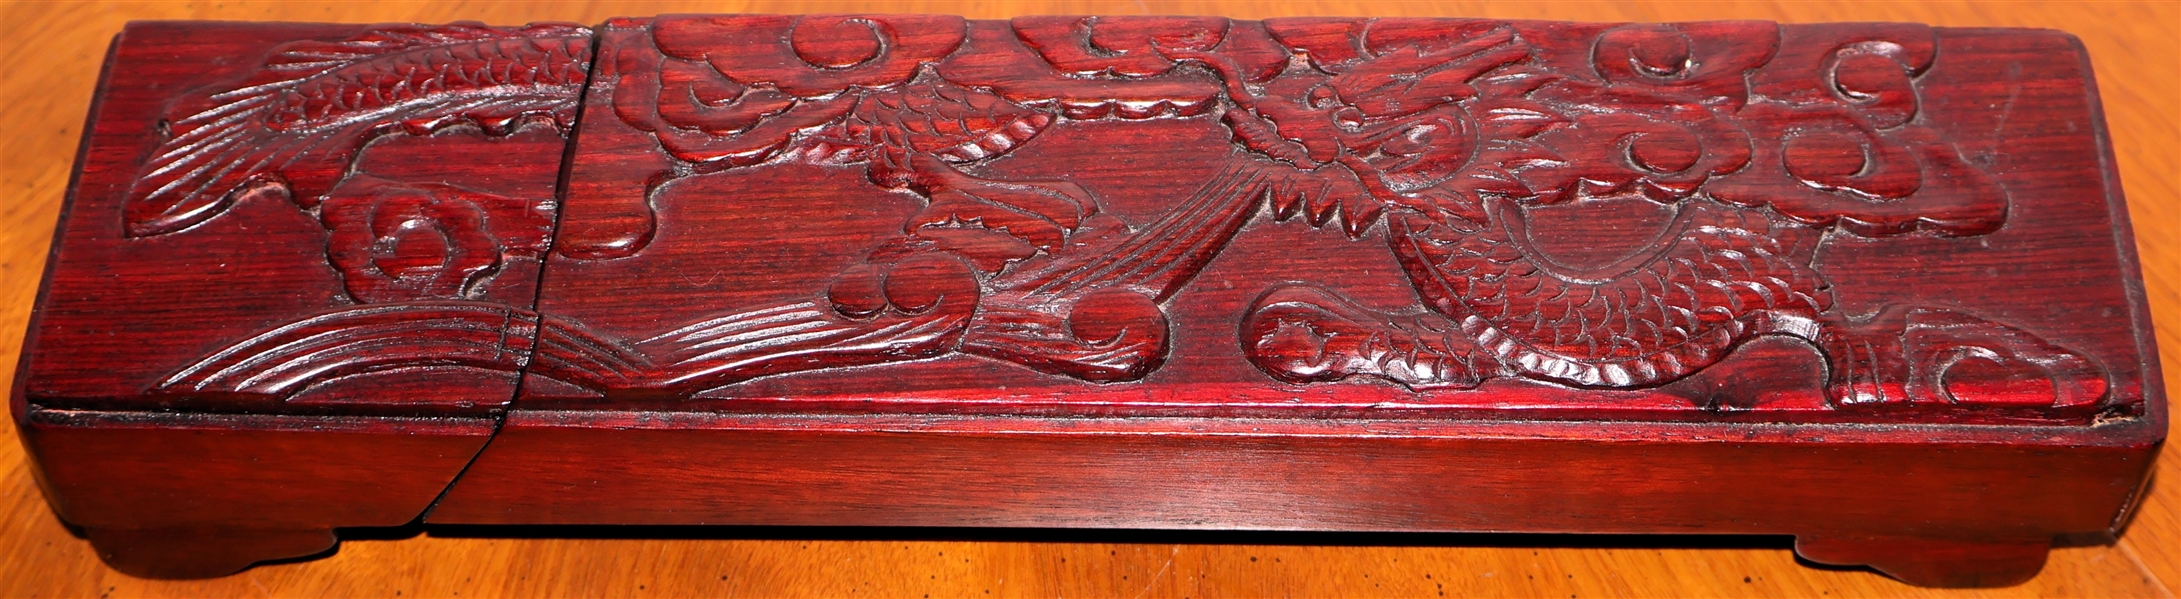 9 Pairs of Chopsticks in Wood Box with Carved Dragon - Box Measures 1 1/2" tall 12 1/2" by 2 3/8" 